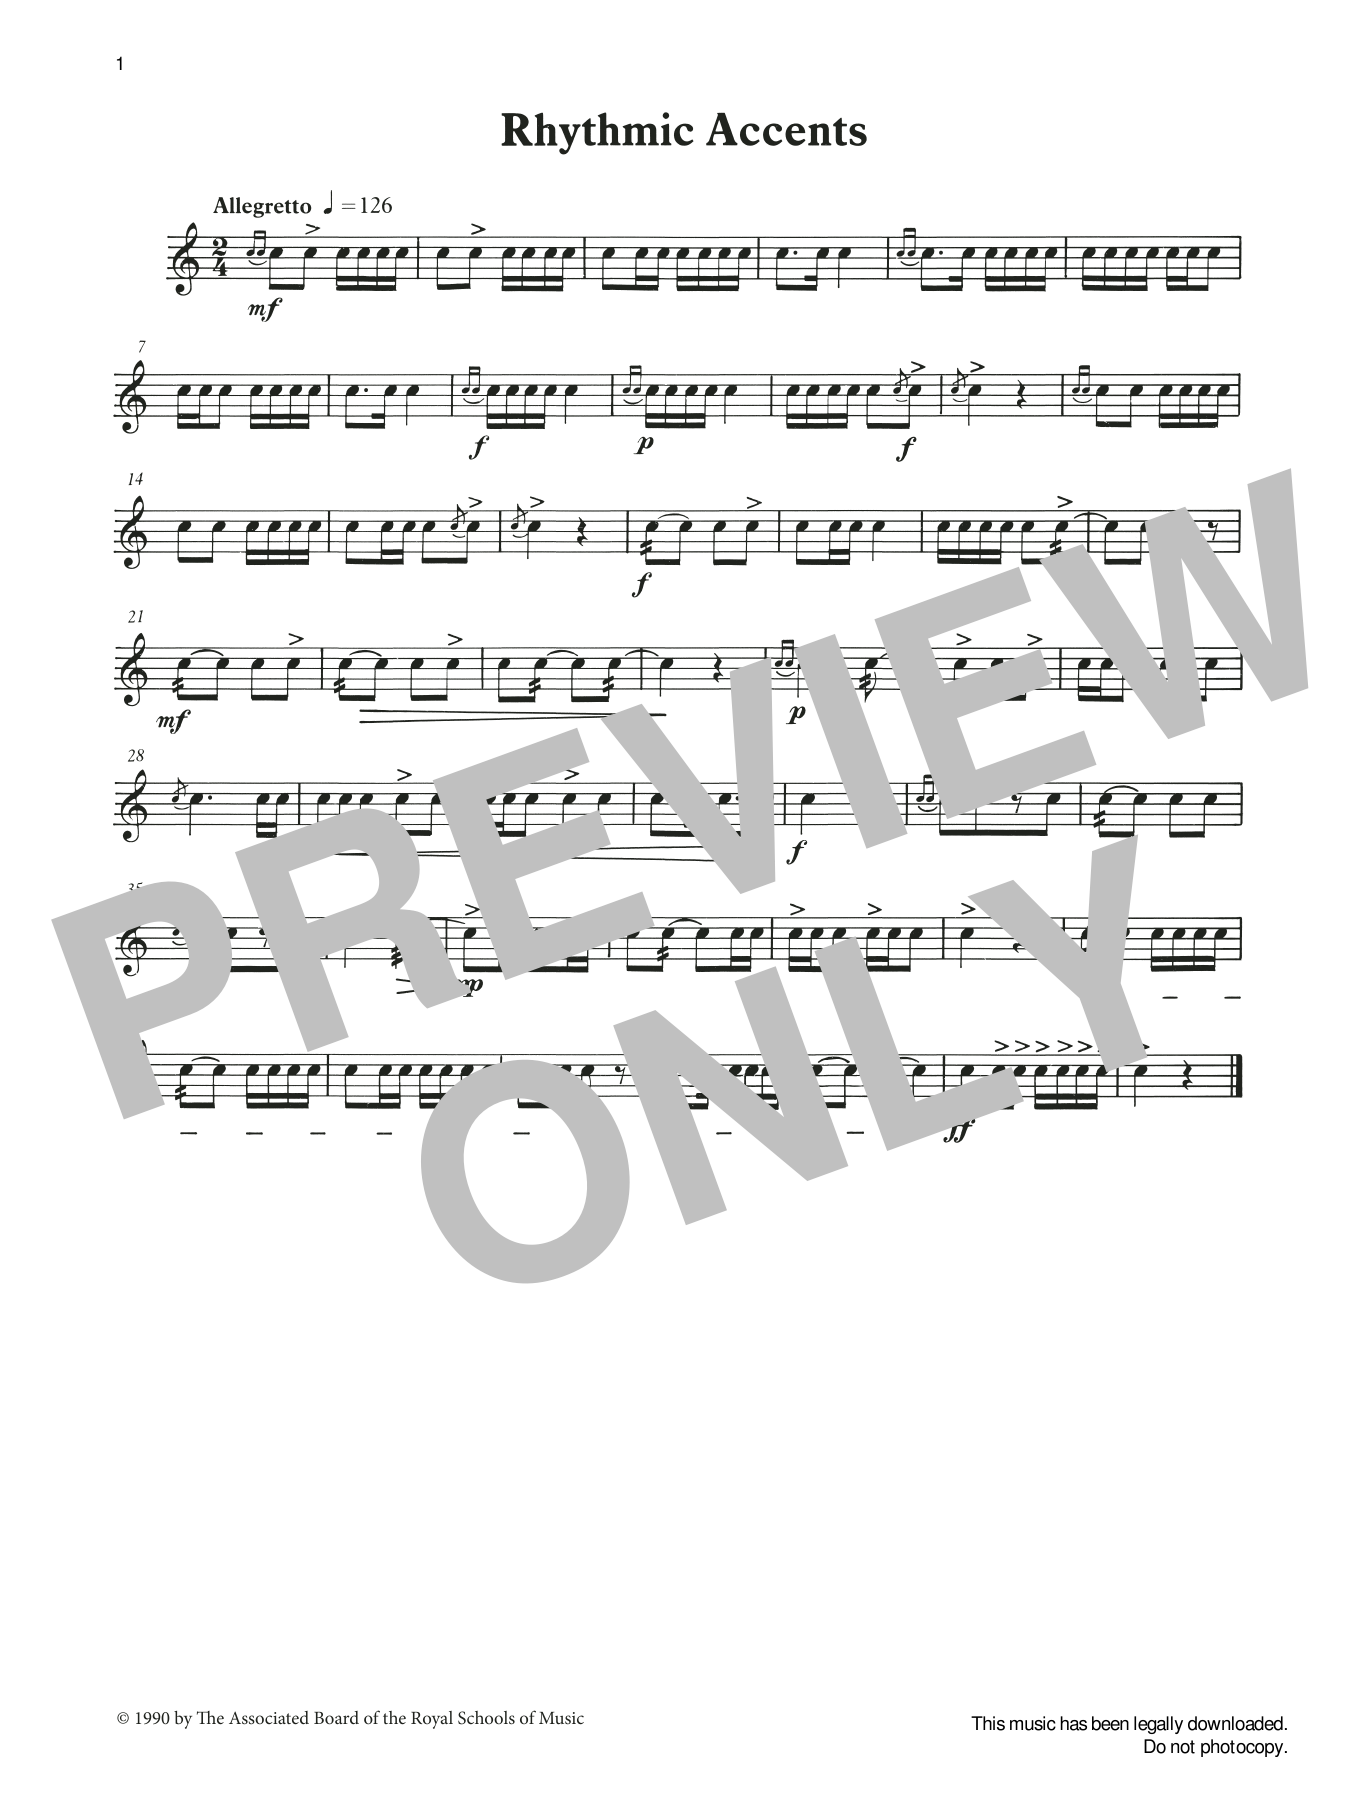 Download Ian Wright and Kevin Hathaway Rhythmic Accents from Graded Music for Sheet Music